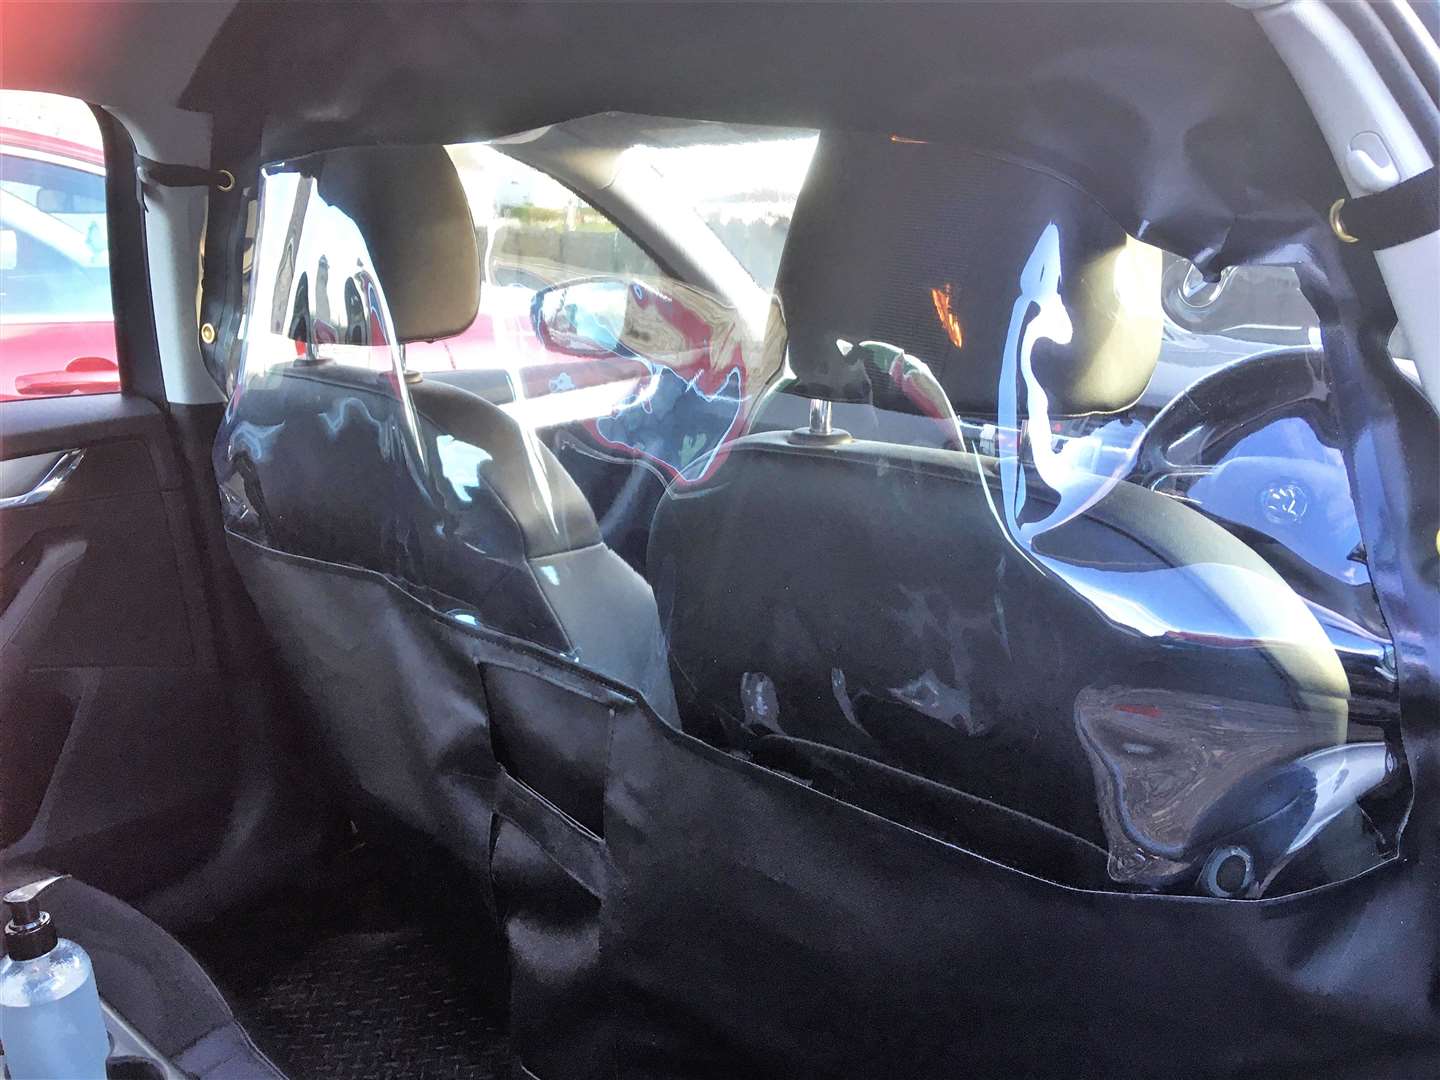 The interior of a Pentland Cabs taxi showing how the screen is attached.